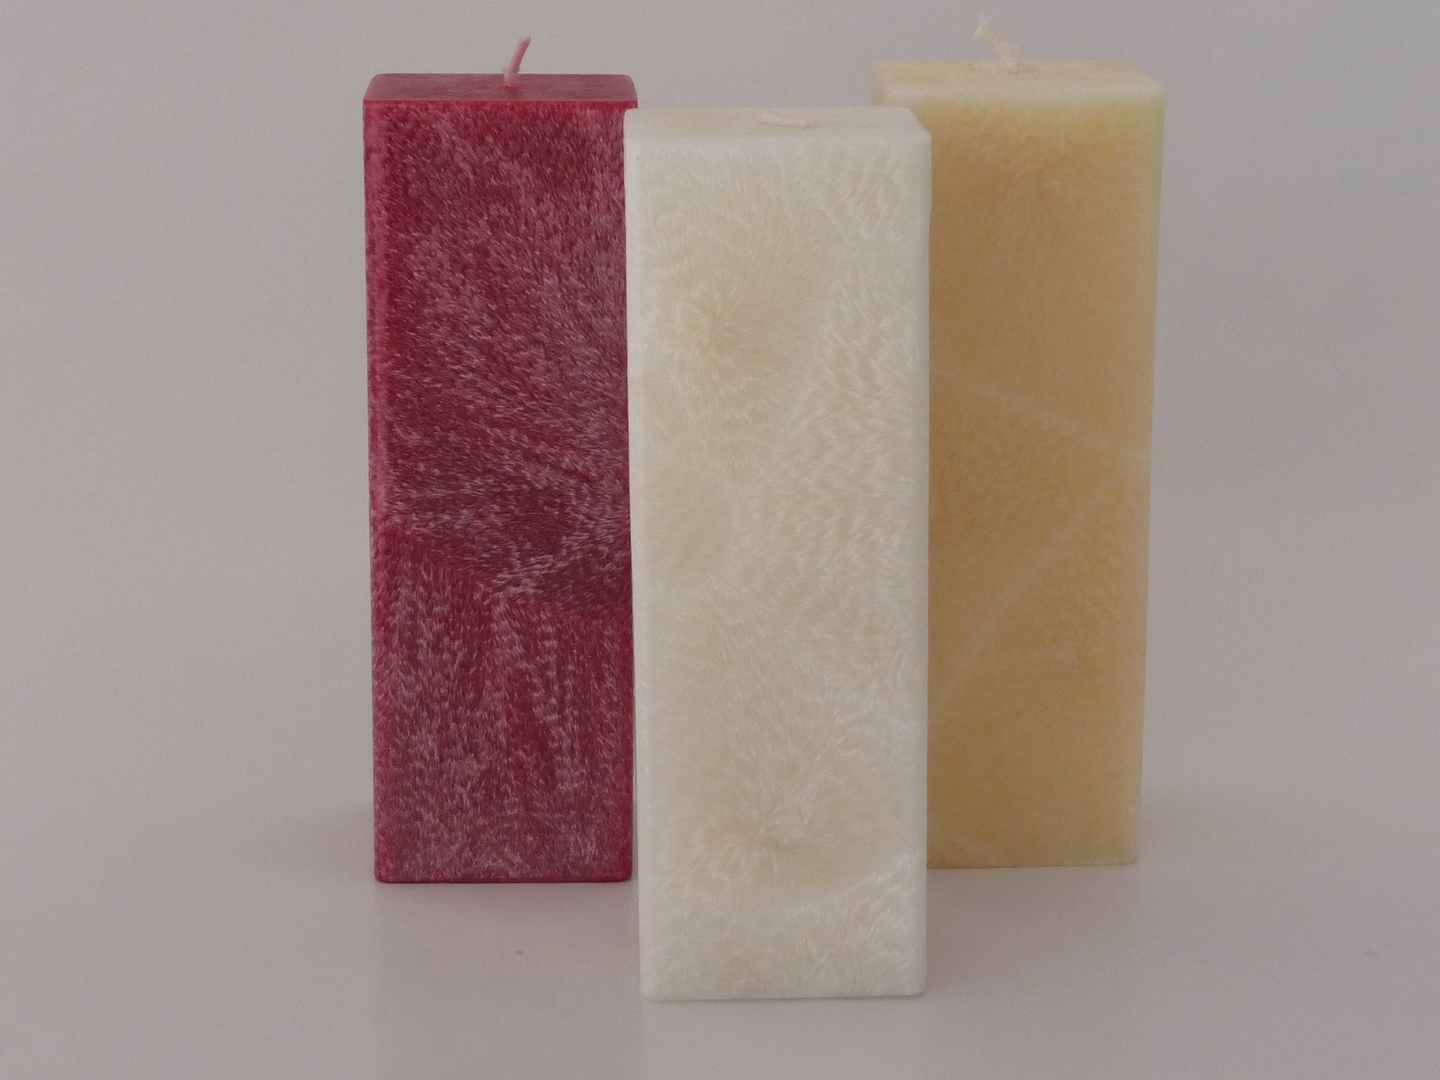 Square Candle Red cranberry fragrance. image 0